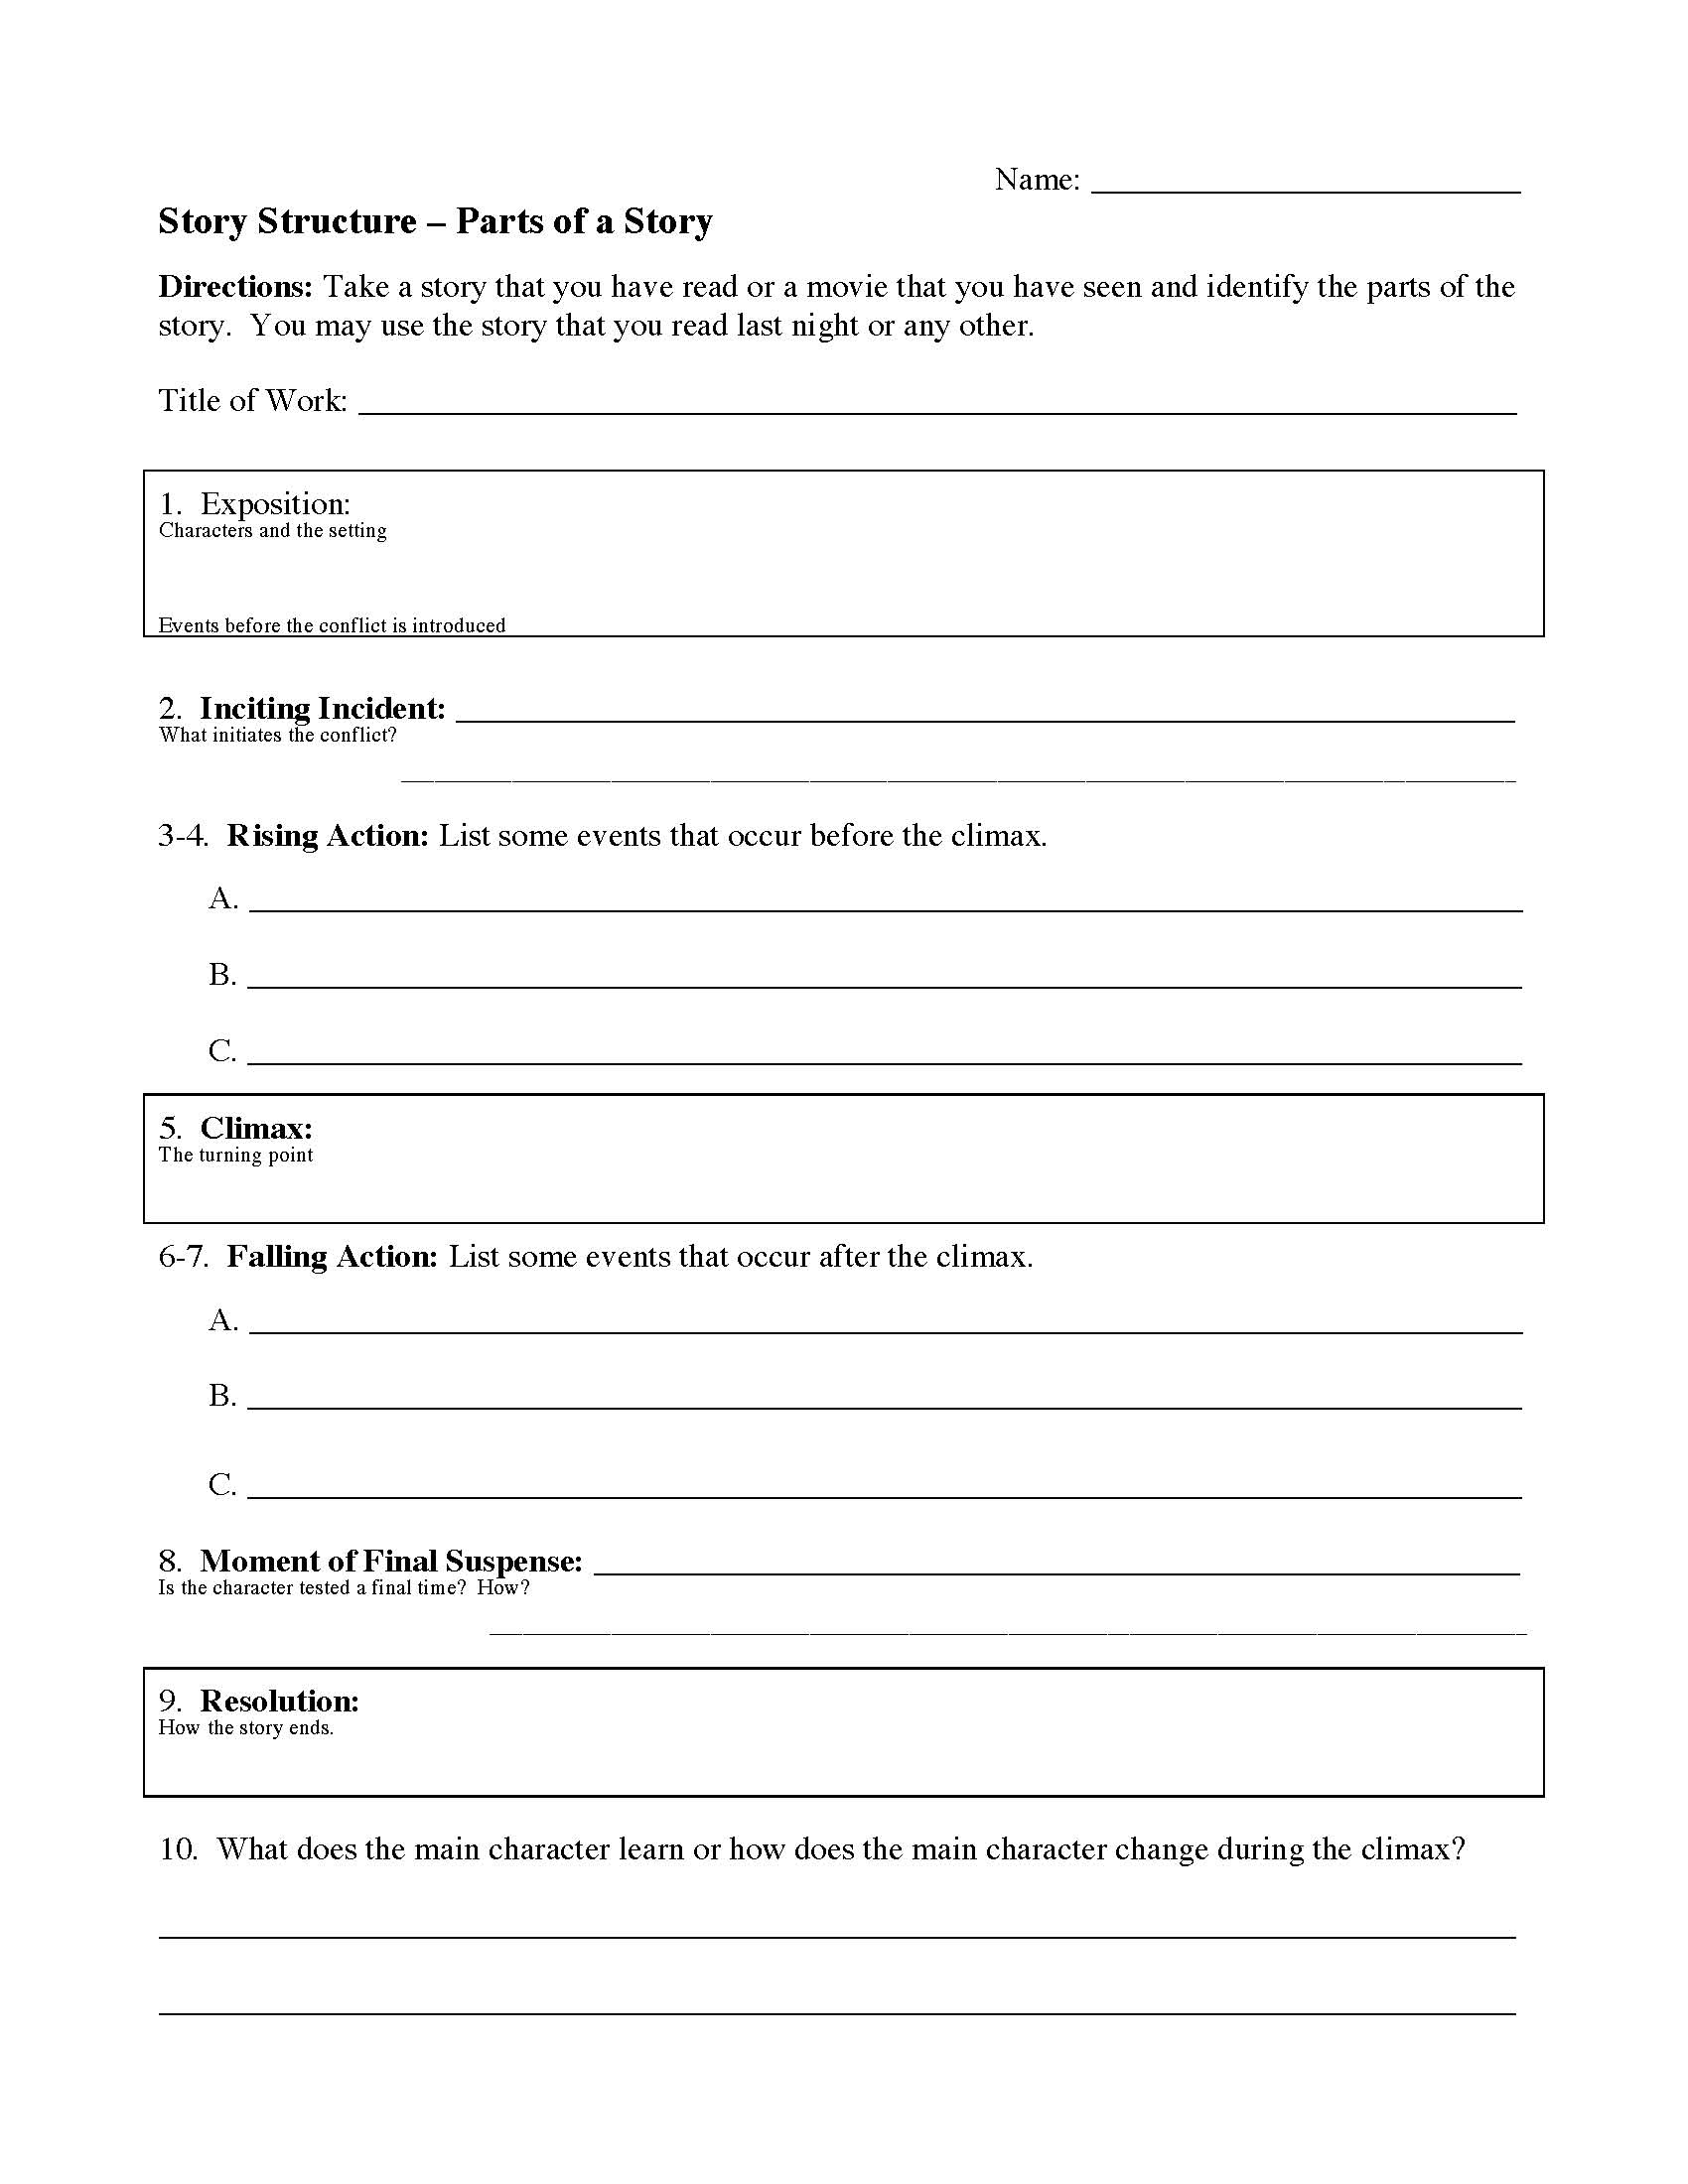 elements-of-a-story-worksheet